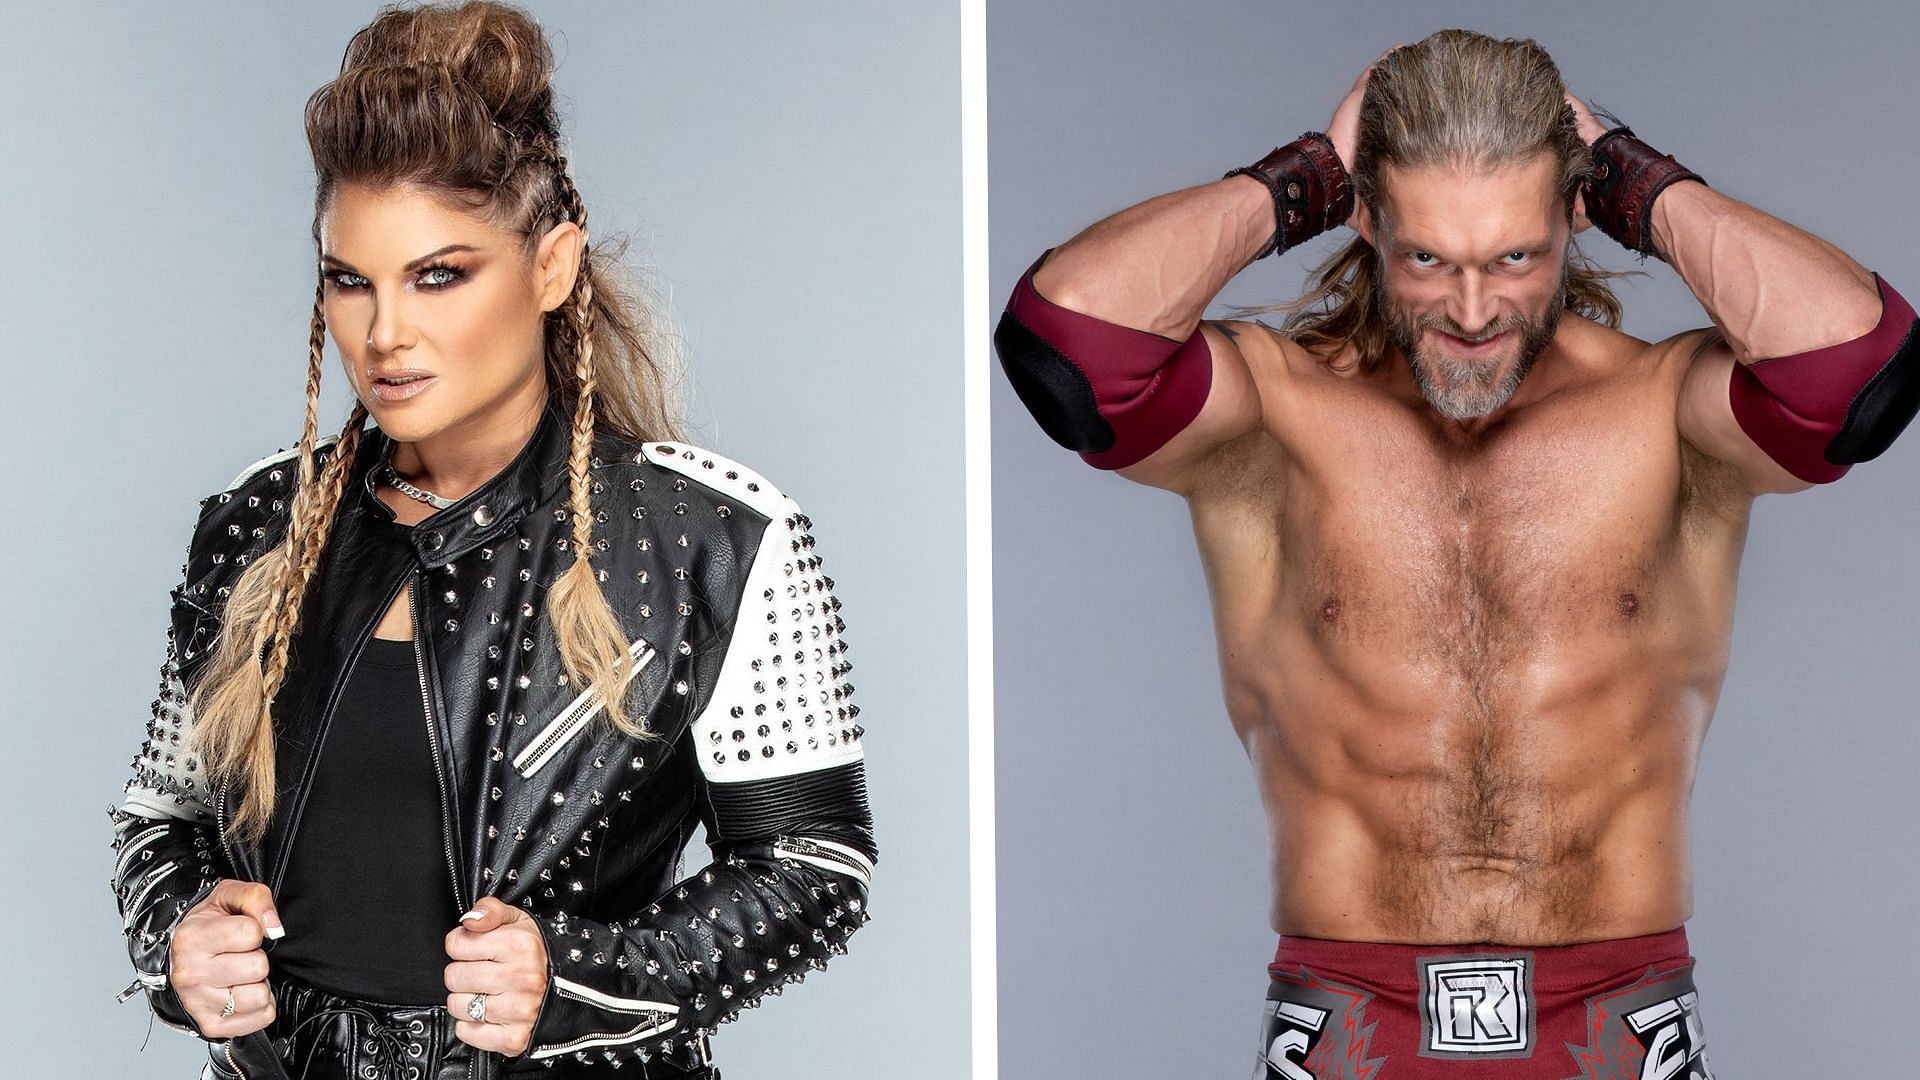 Beth Phoenix and Edge could battle other stars in WWE